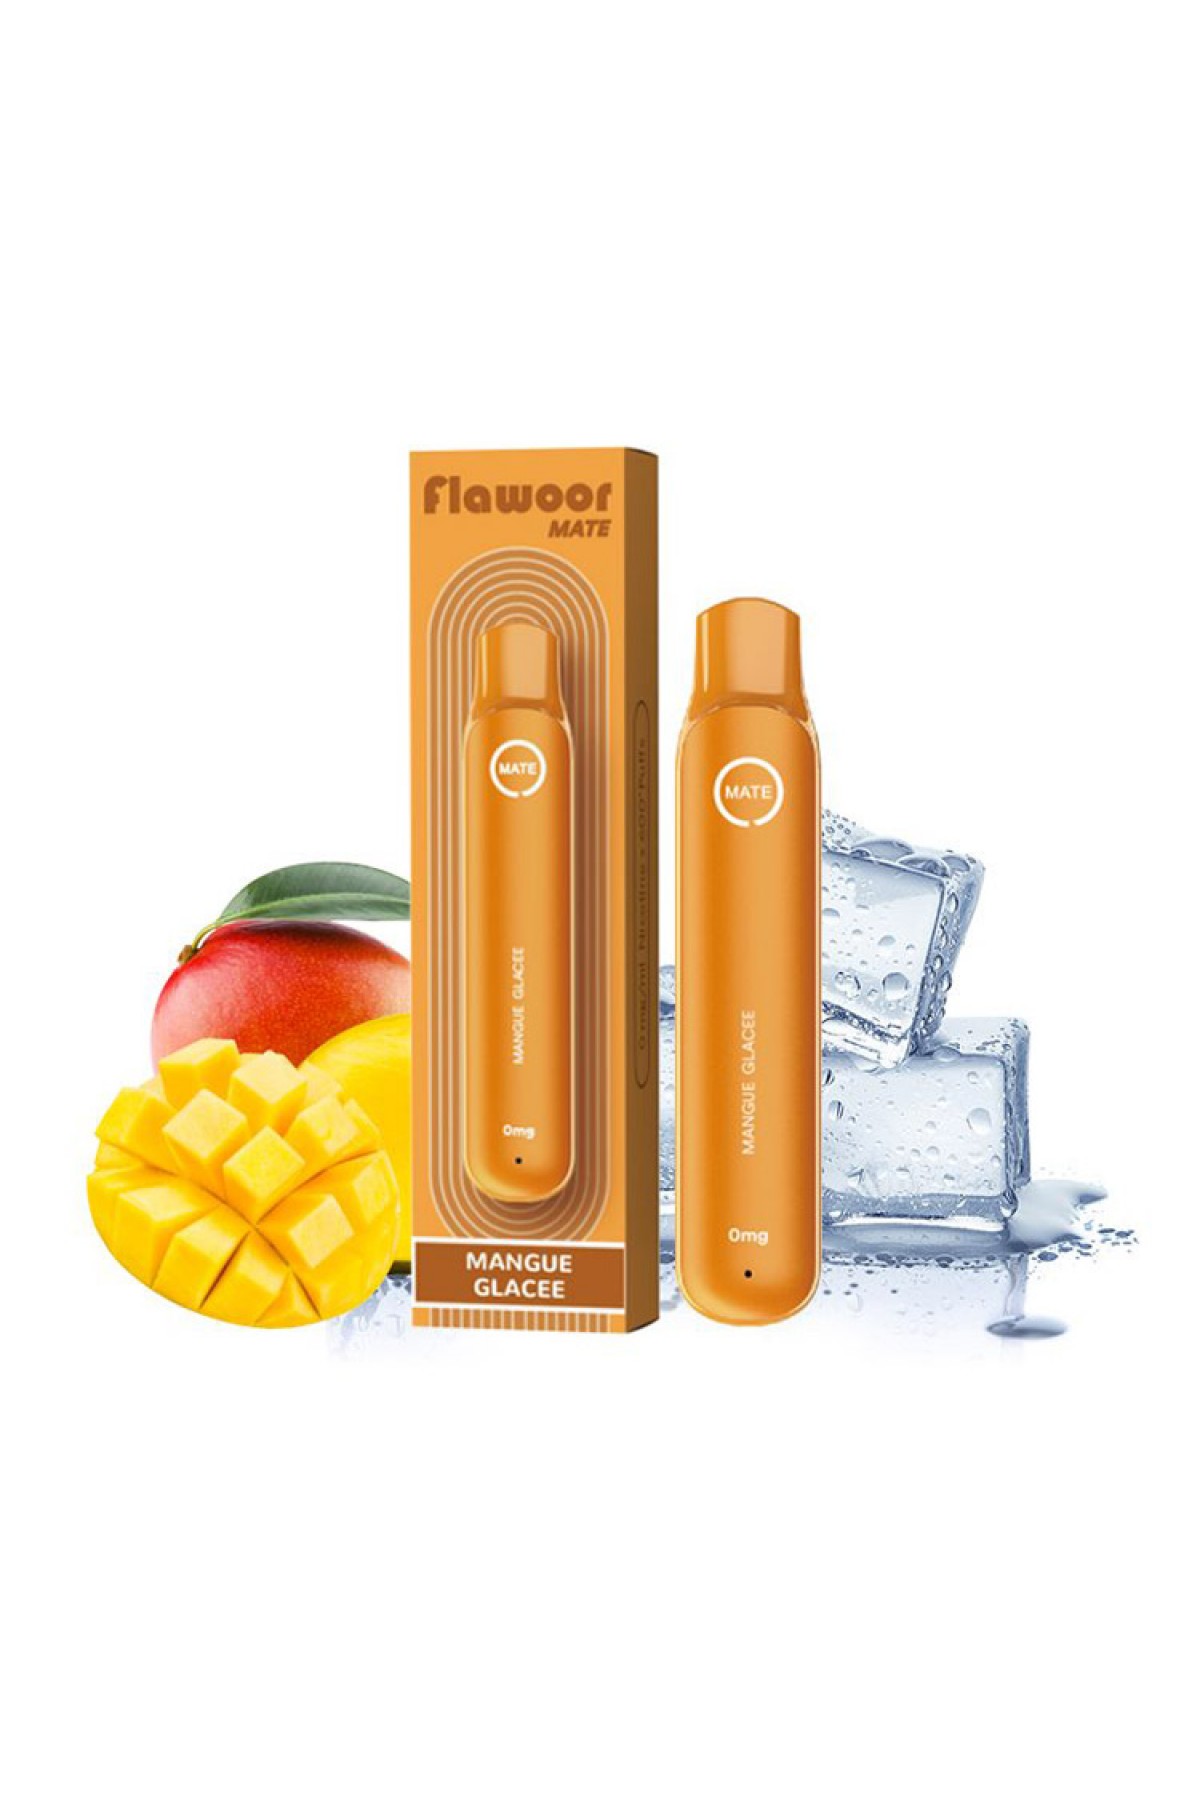 Flawoor Mate - Mangue Glacée 600 Puff Kit